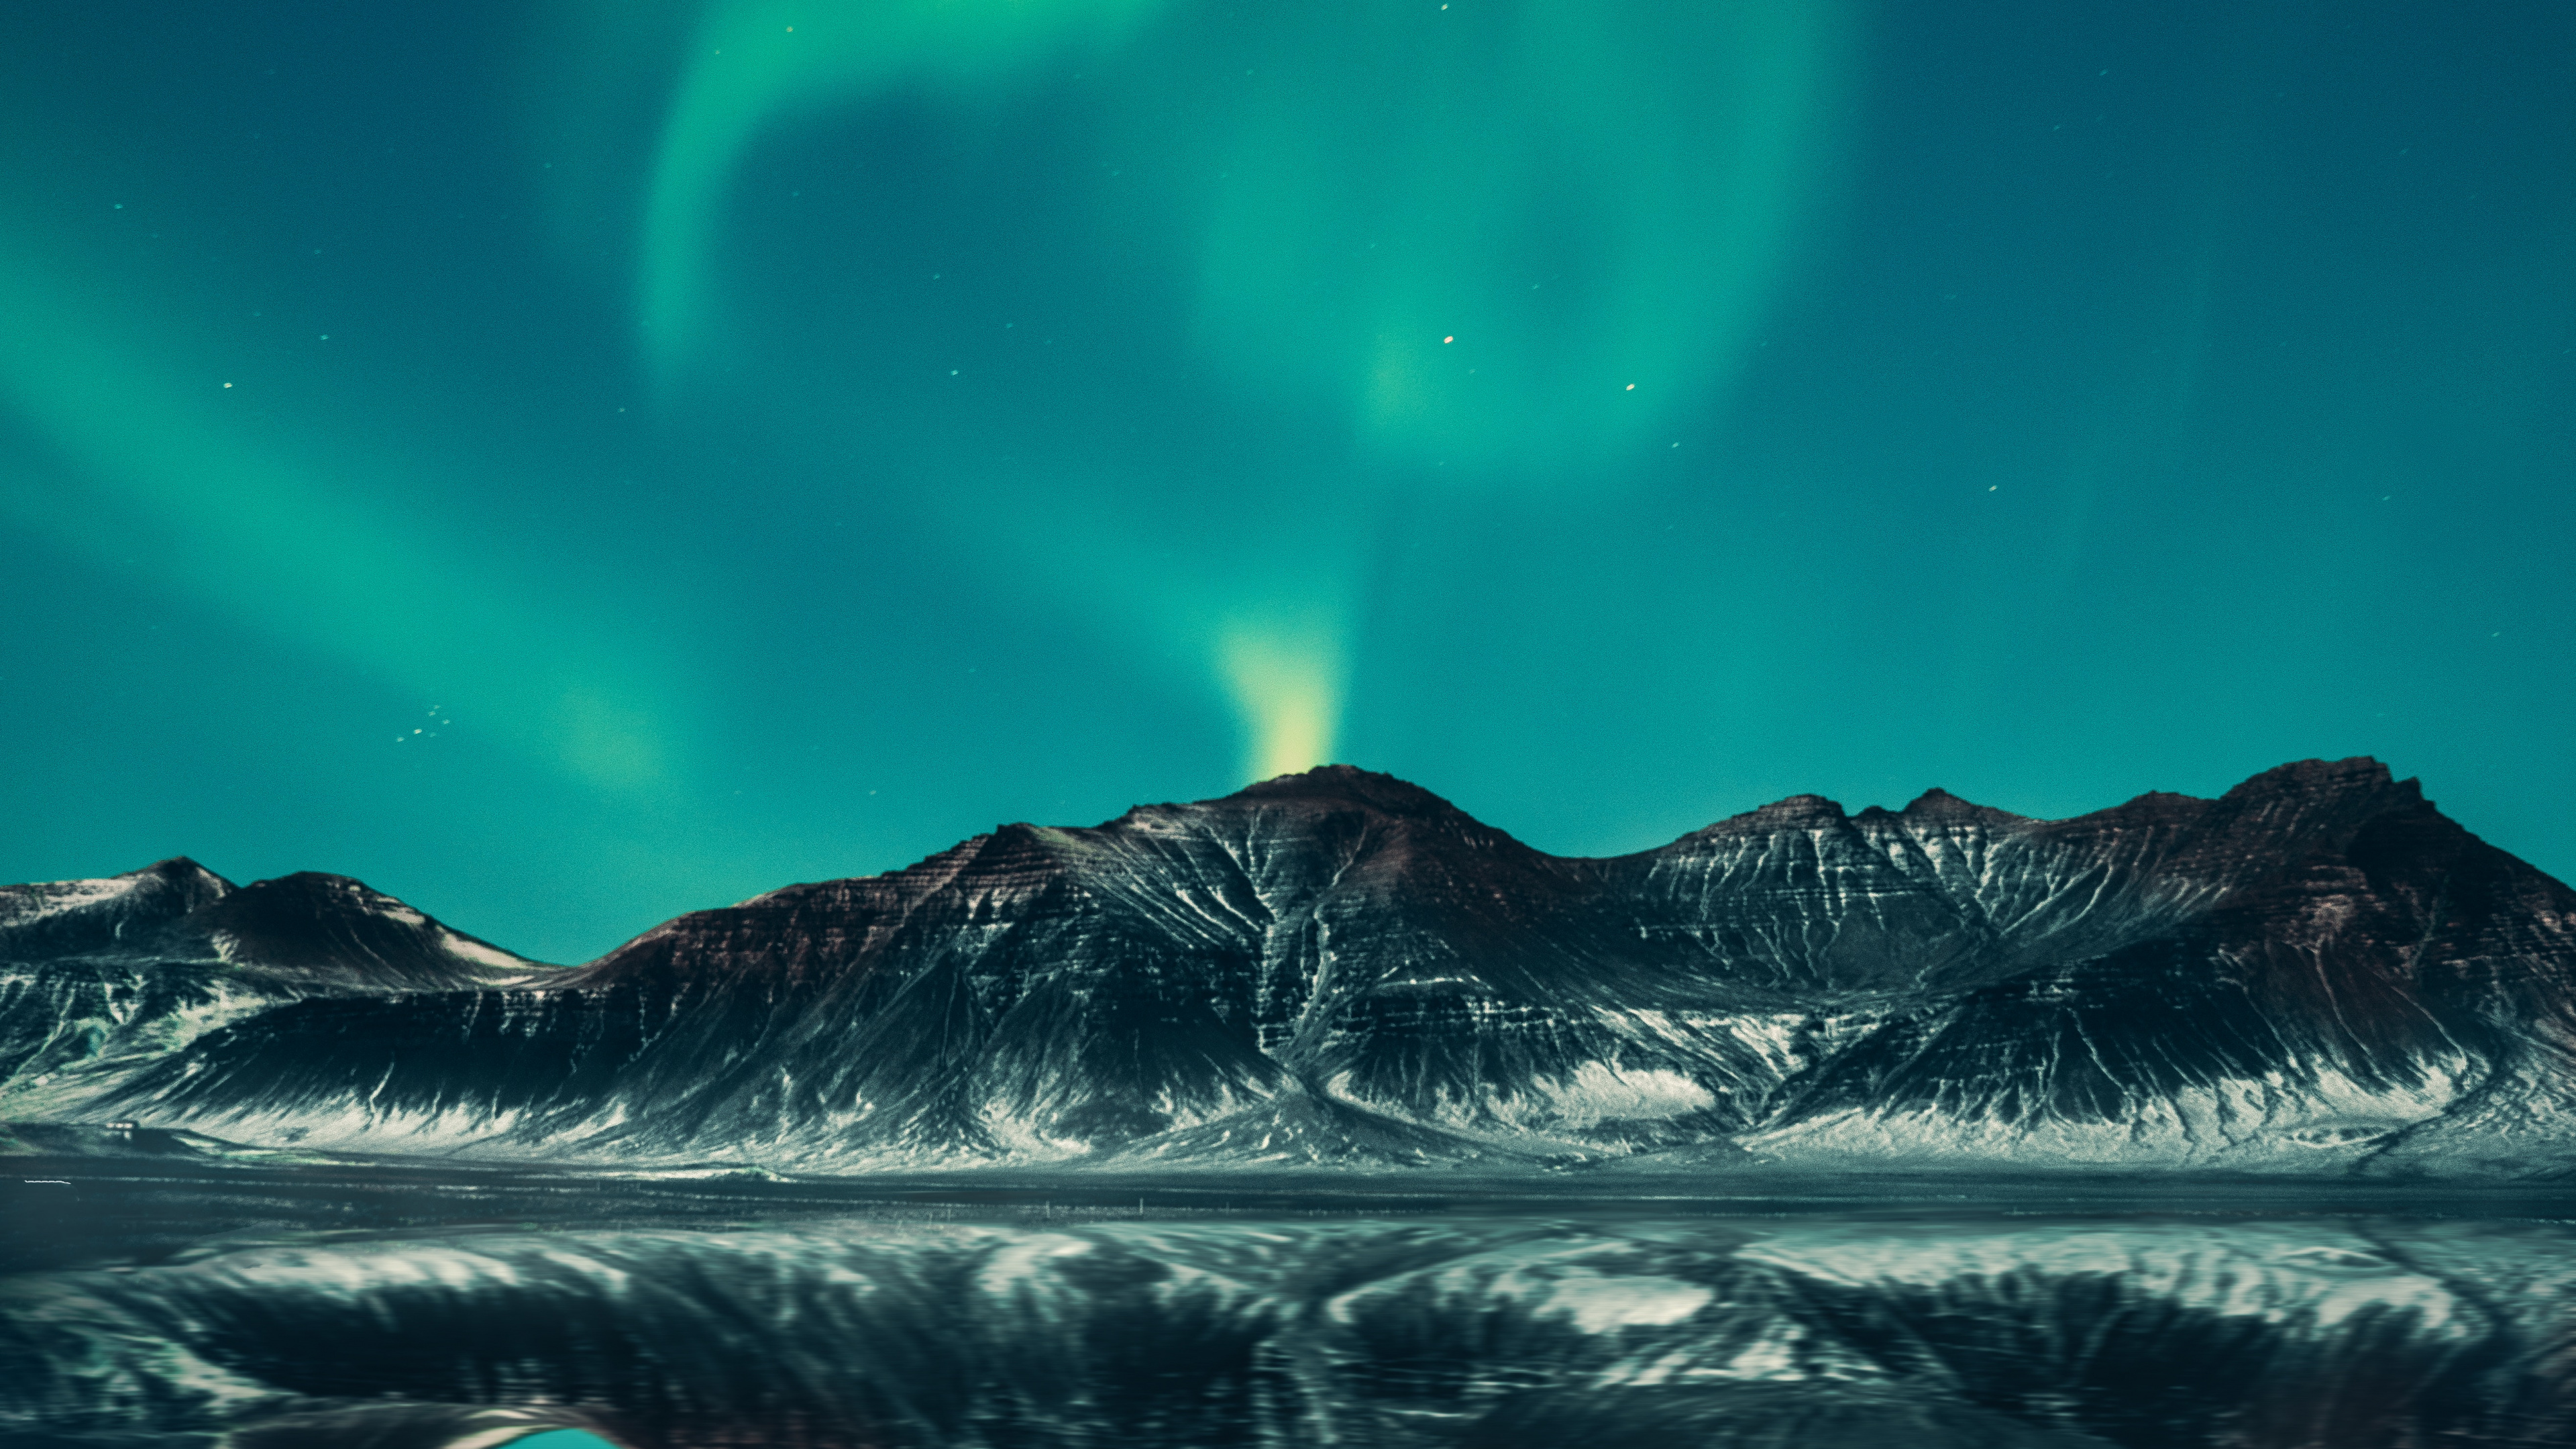 Northern Lights Poster, Aurora, Earth, Poster, Northern Lights Viewing. Wallpaper in 3840x2160 Resolution